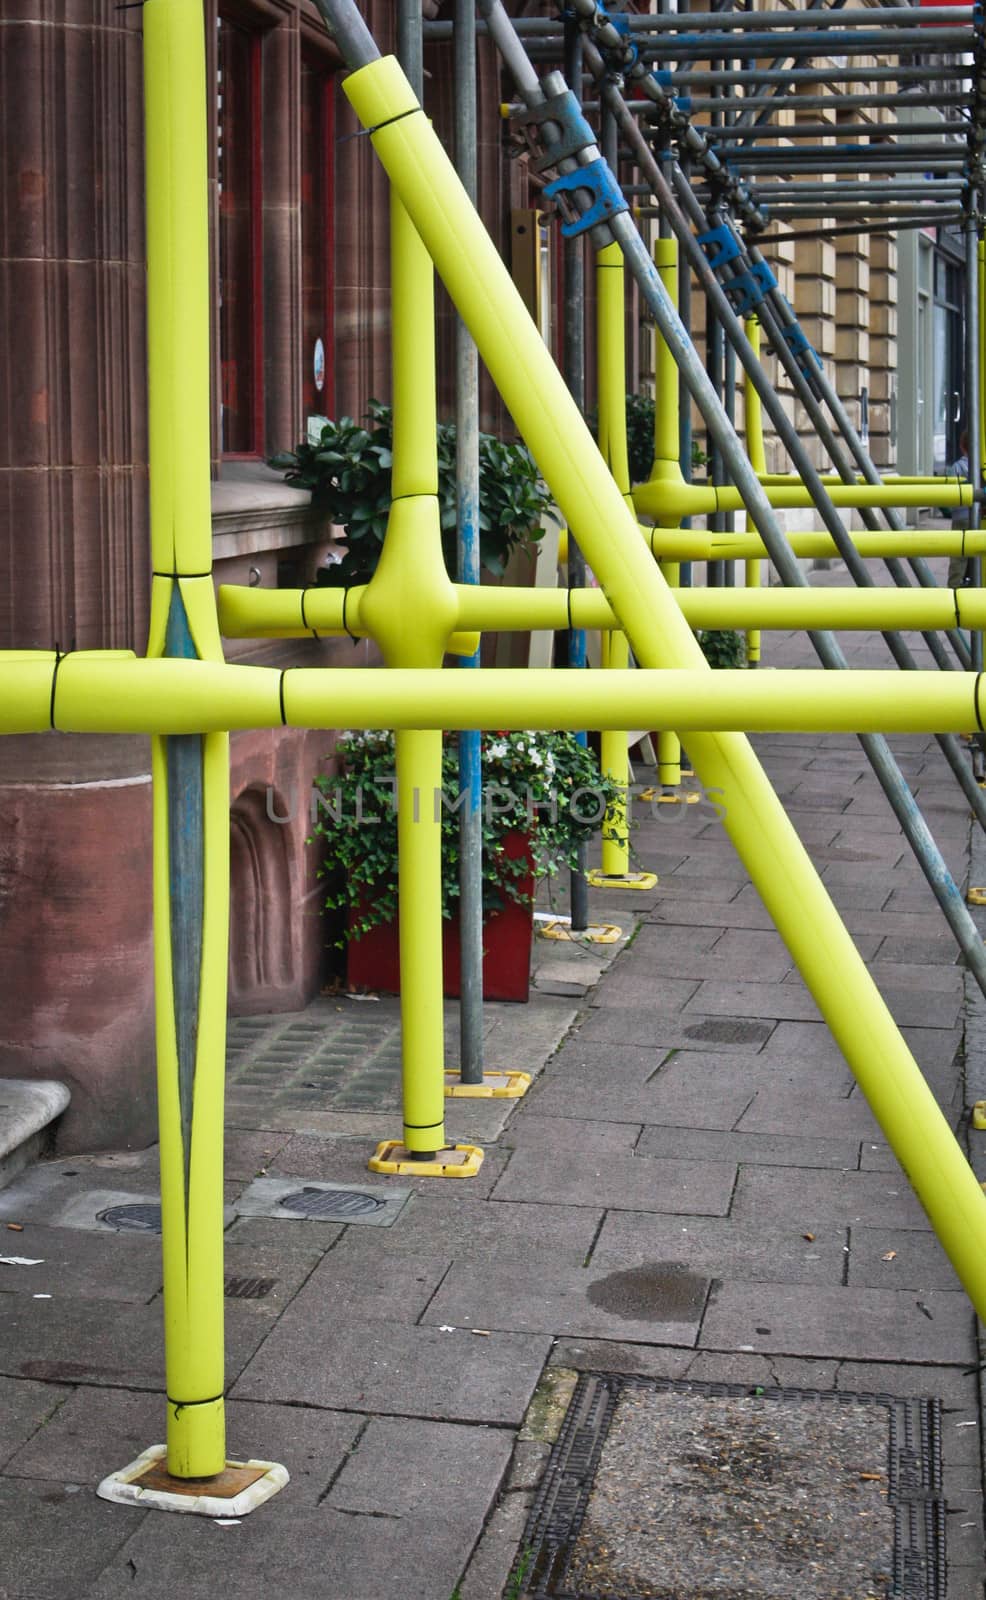 Protective foam on scaffolding bars in a public place